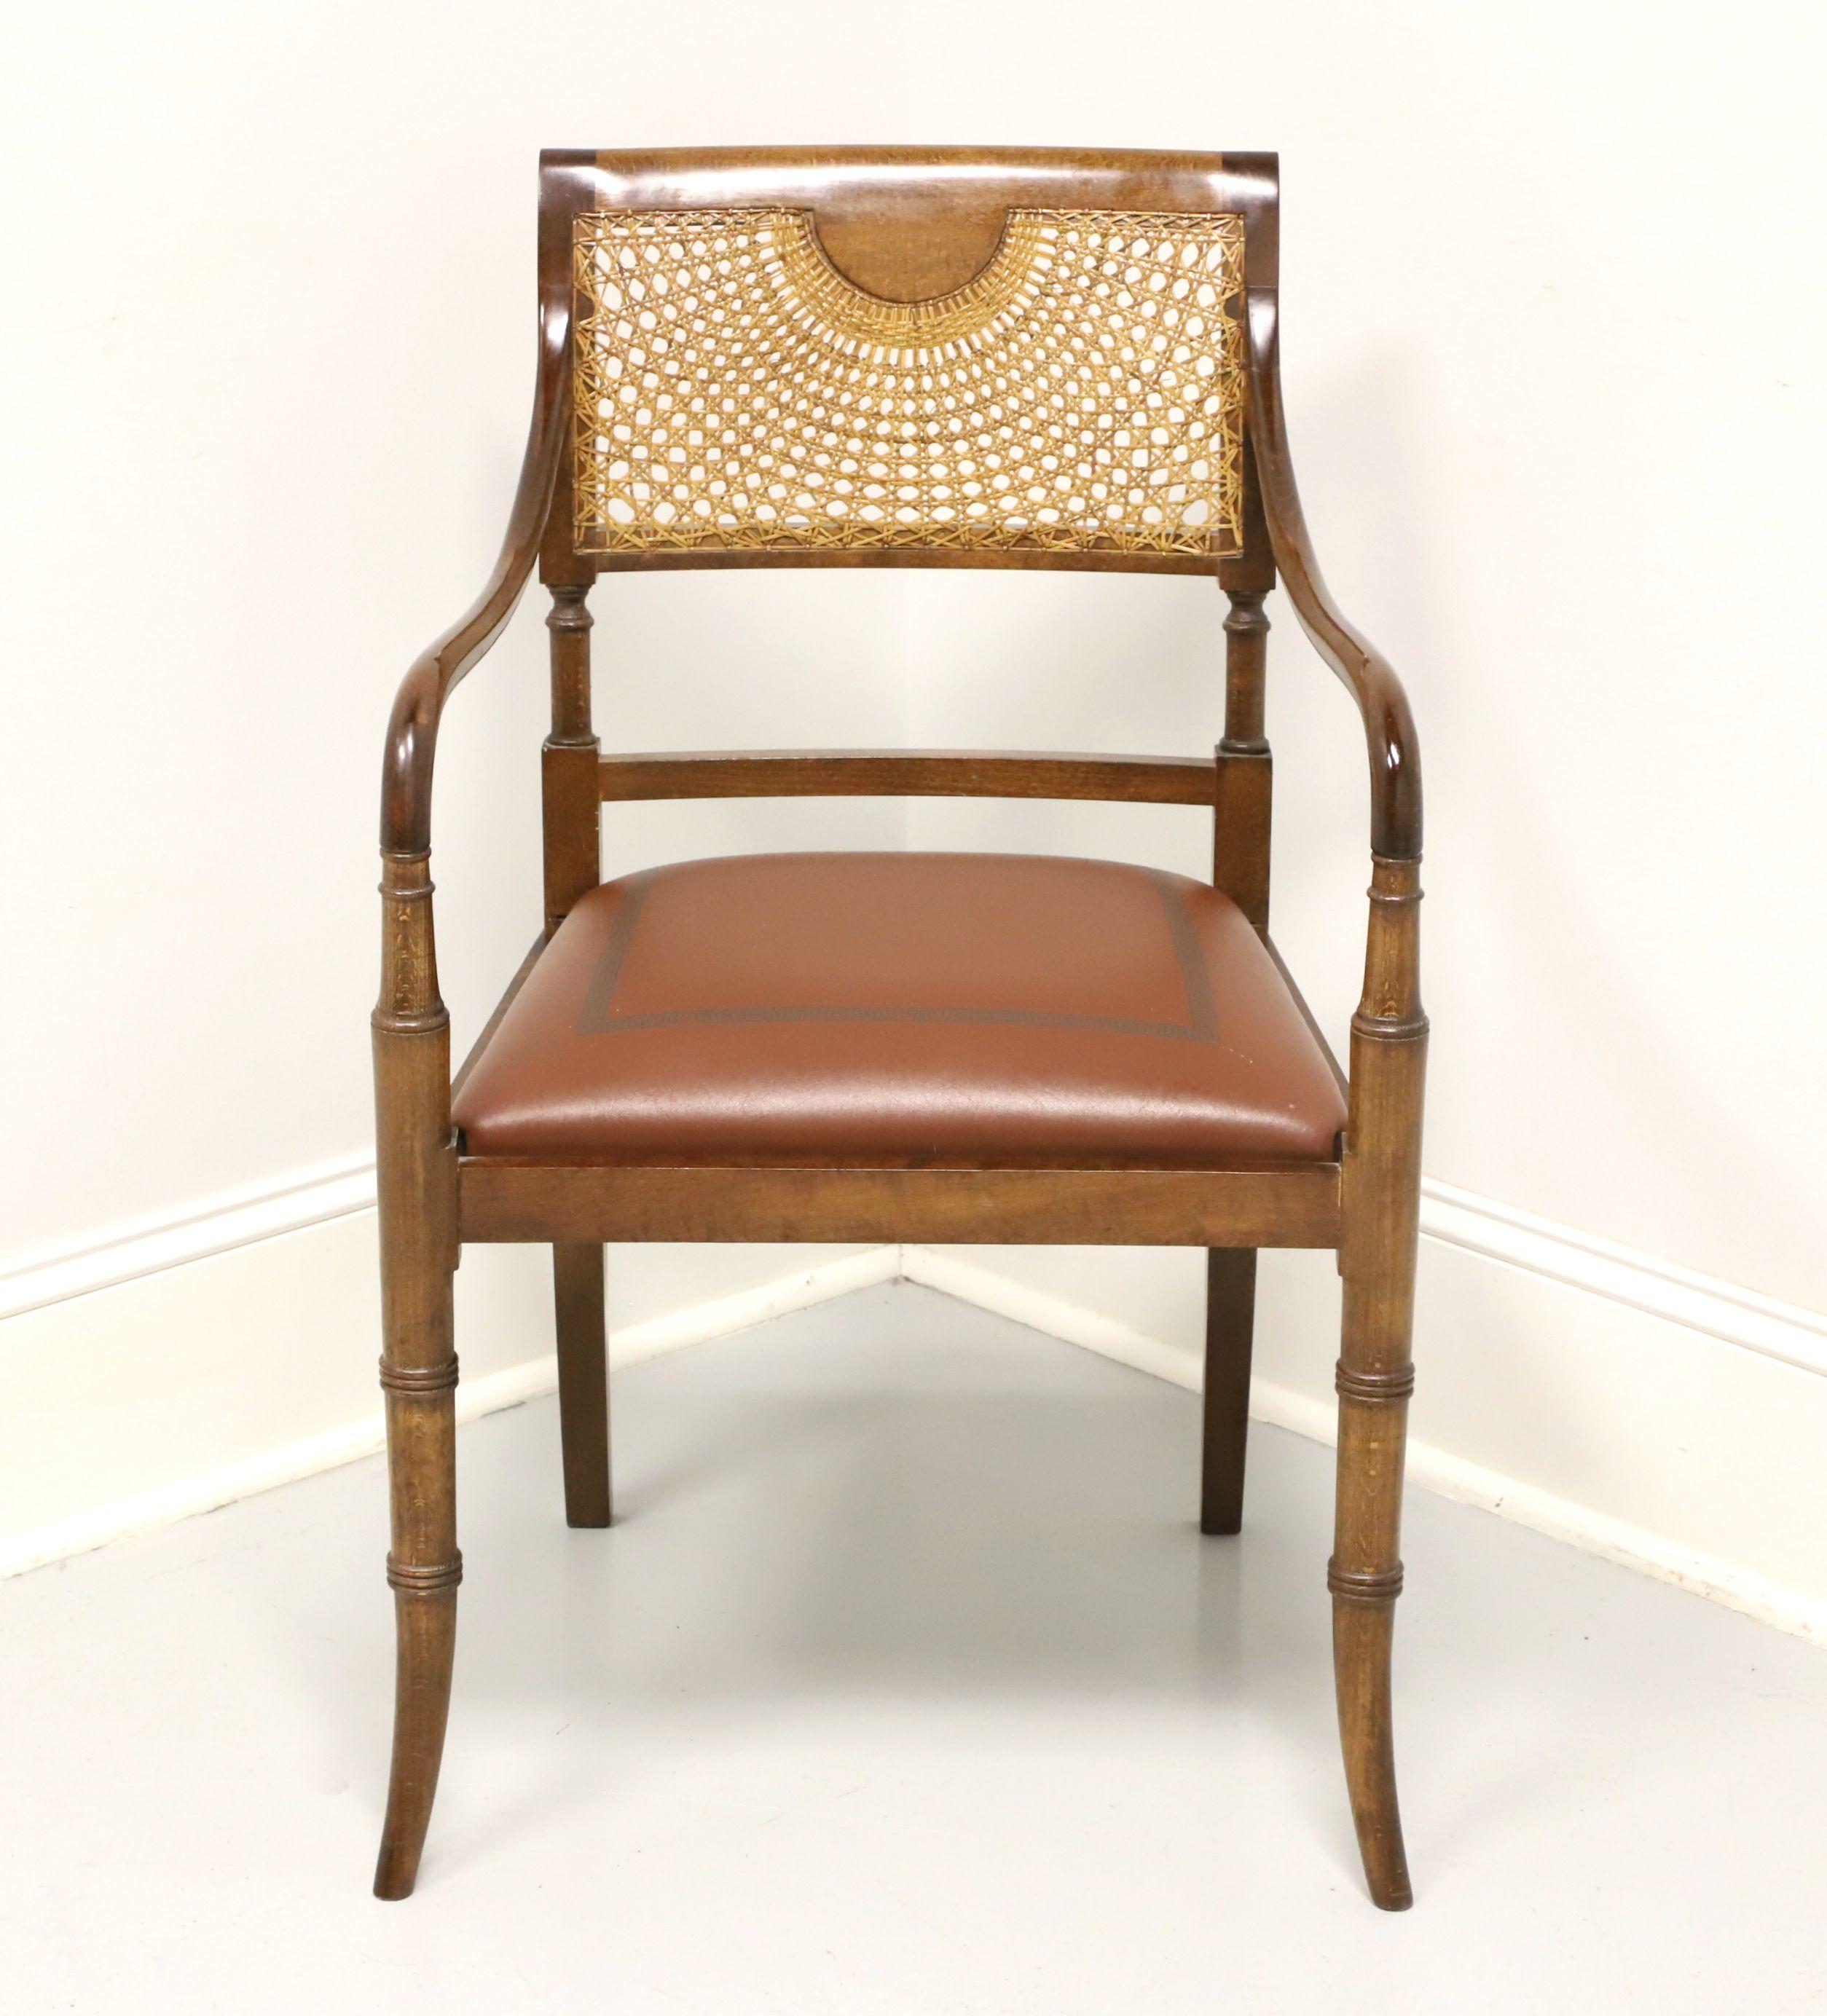 A Regency style armchair, unbranded, similar quality to Maitland Smith or Hancock & Moore. Faux bamboo design to the frame, cane spider web pattern to back rest, smooth curved arms, embossed brown leather upholstered seat, turned stiles, and tapered